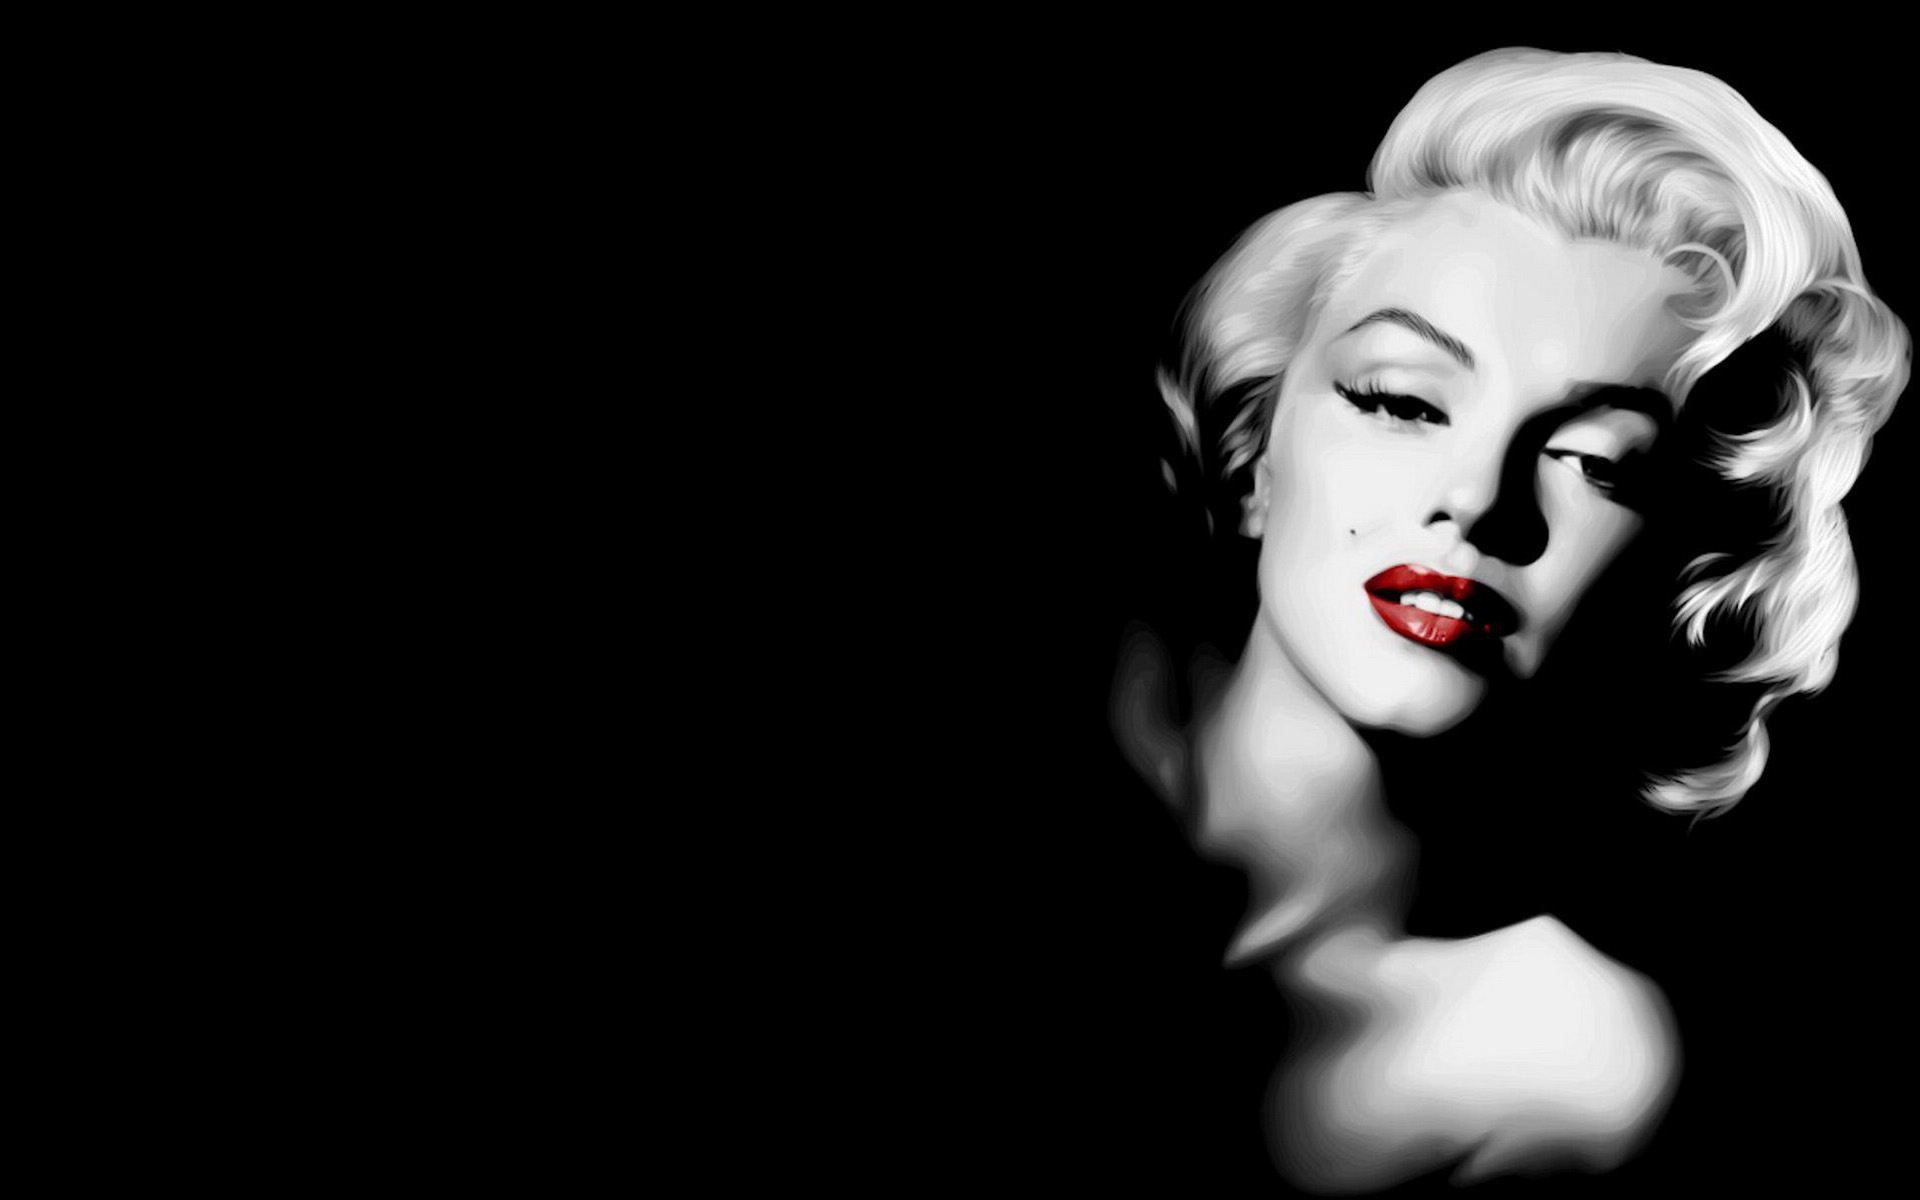 Artistic Marilyn Monroe   Cool Backgrounds